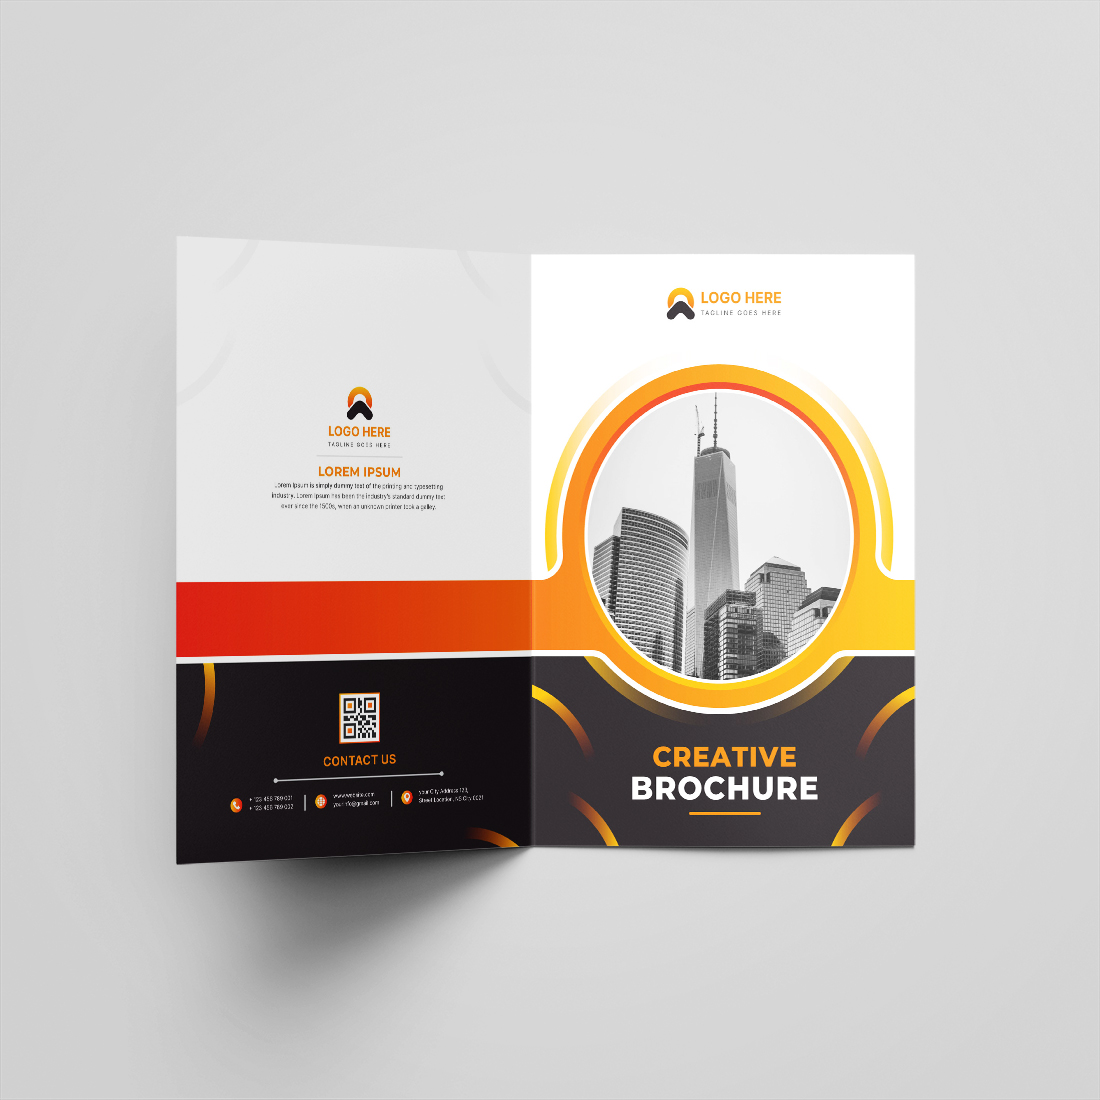 Corporate brochure cover or book cover template design cover image.